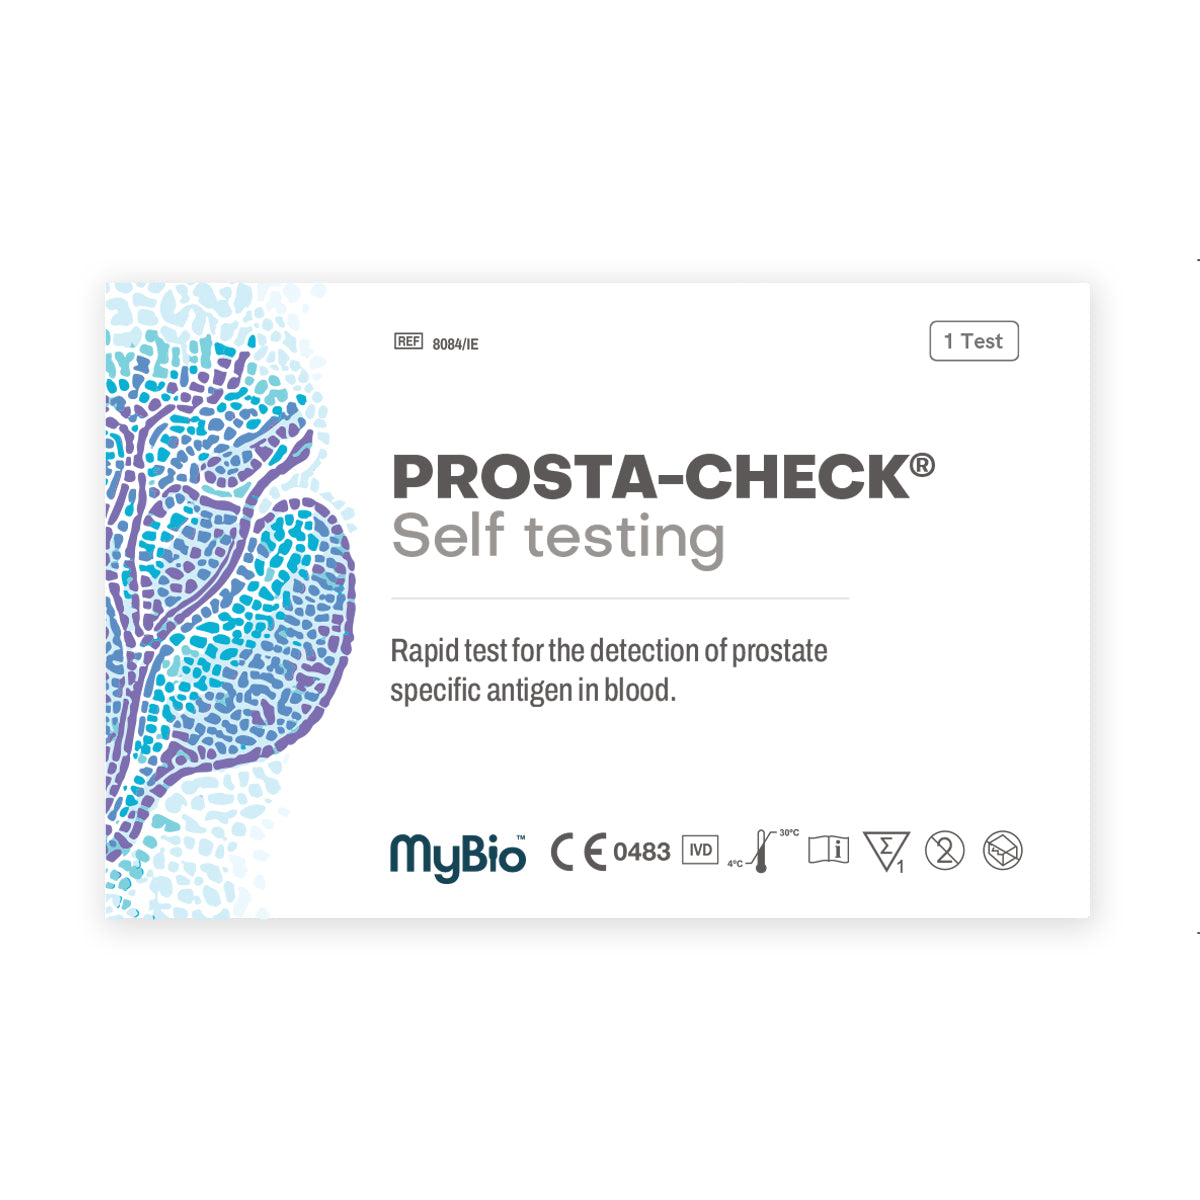 MyBio Prosta Check Test is designed to detect elevated prostate-specific antigen (PSA) proteins in the blood. 